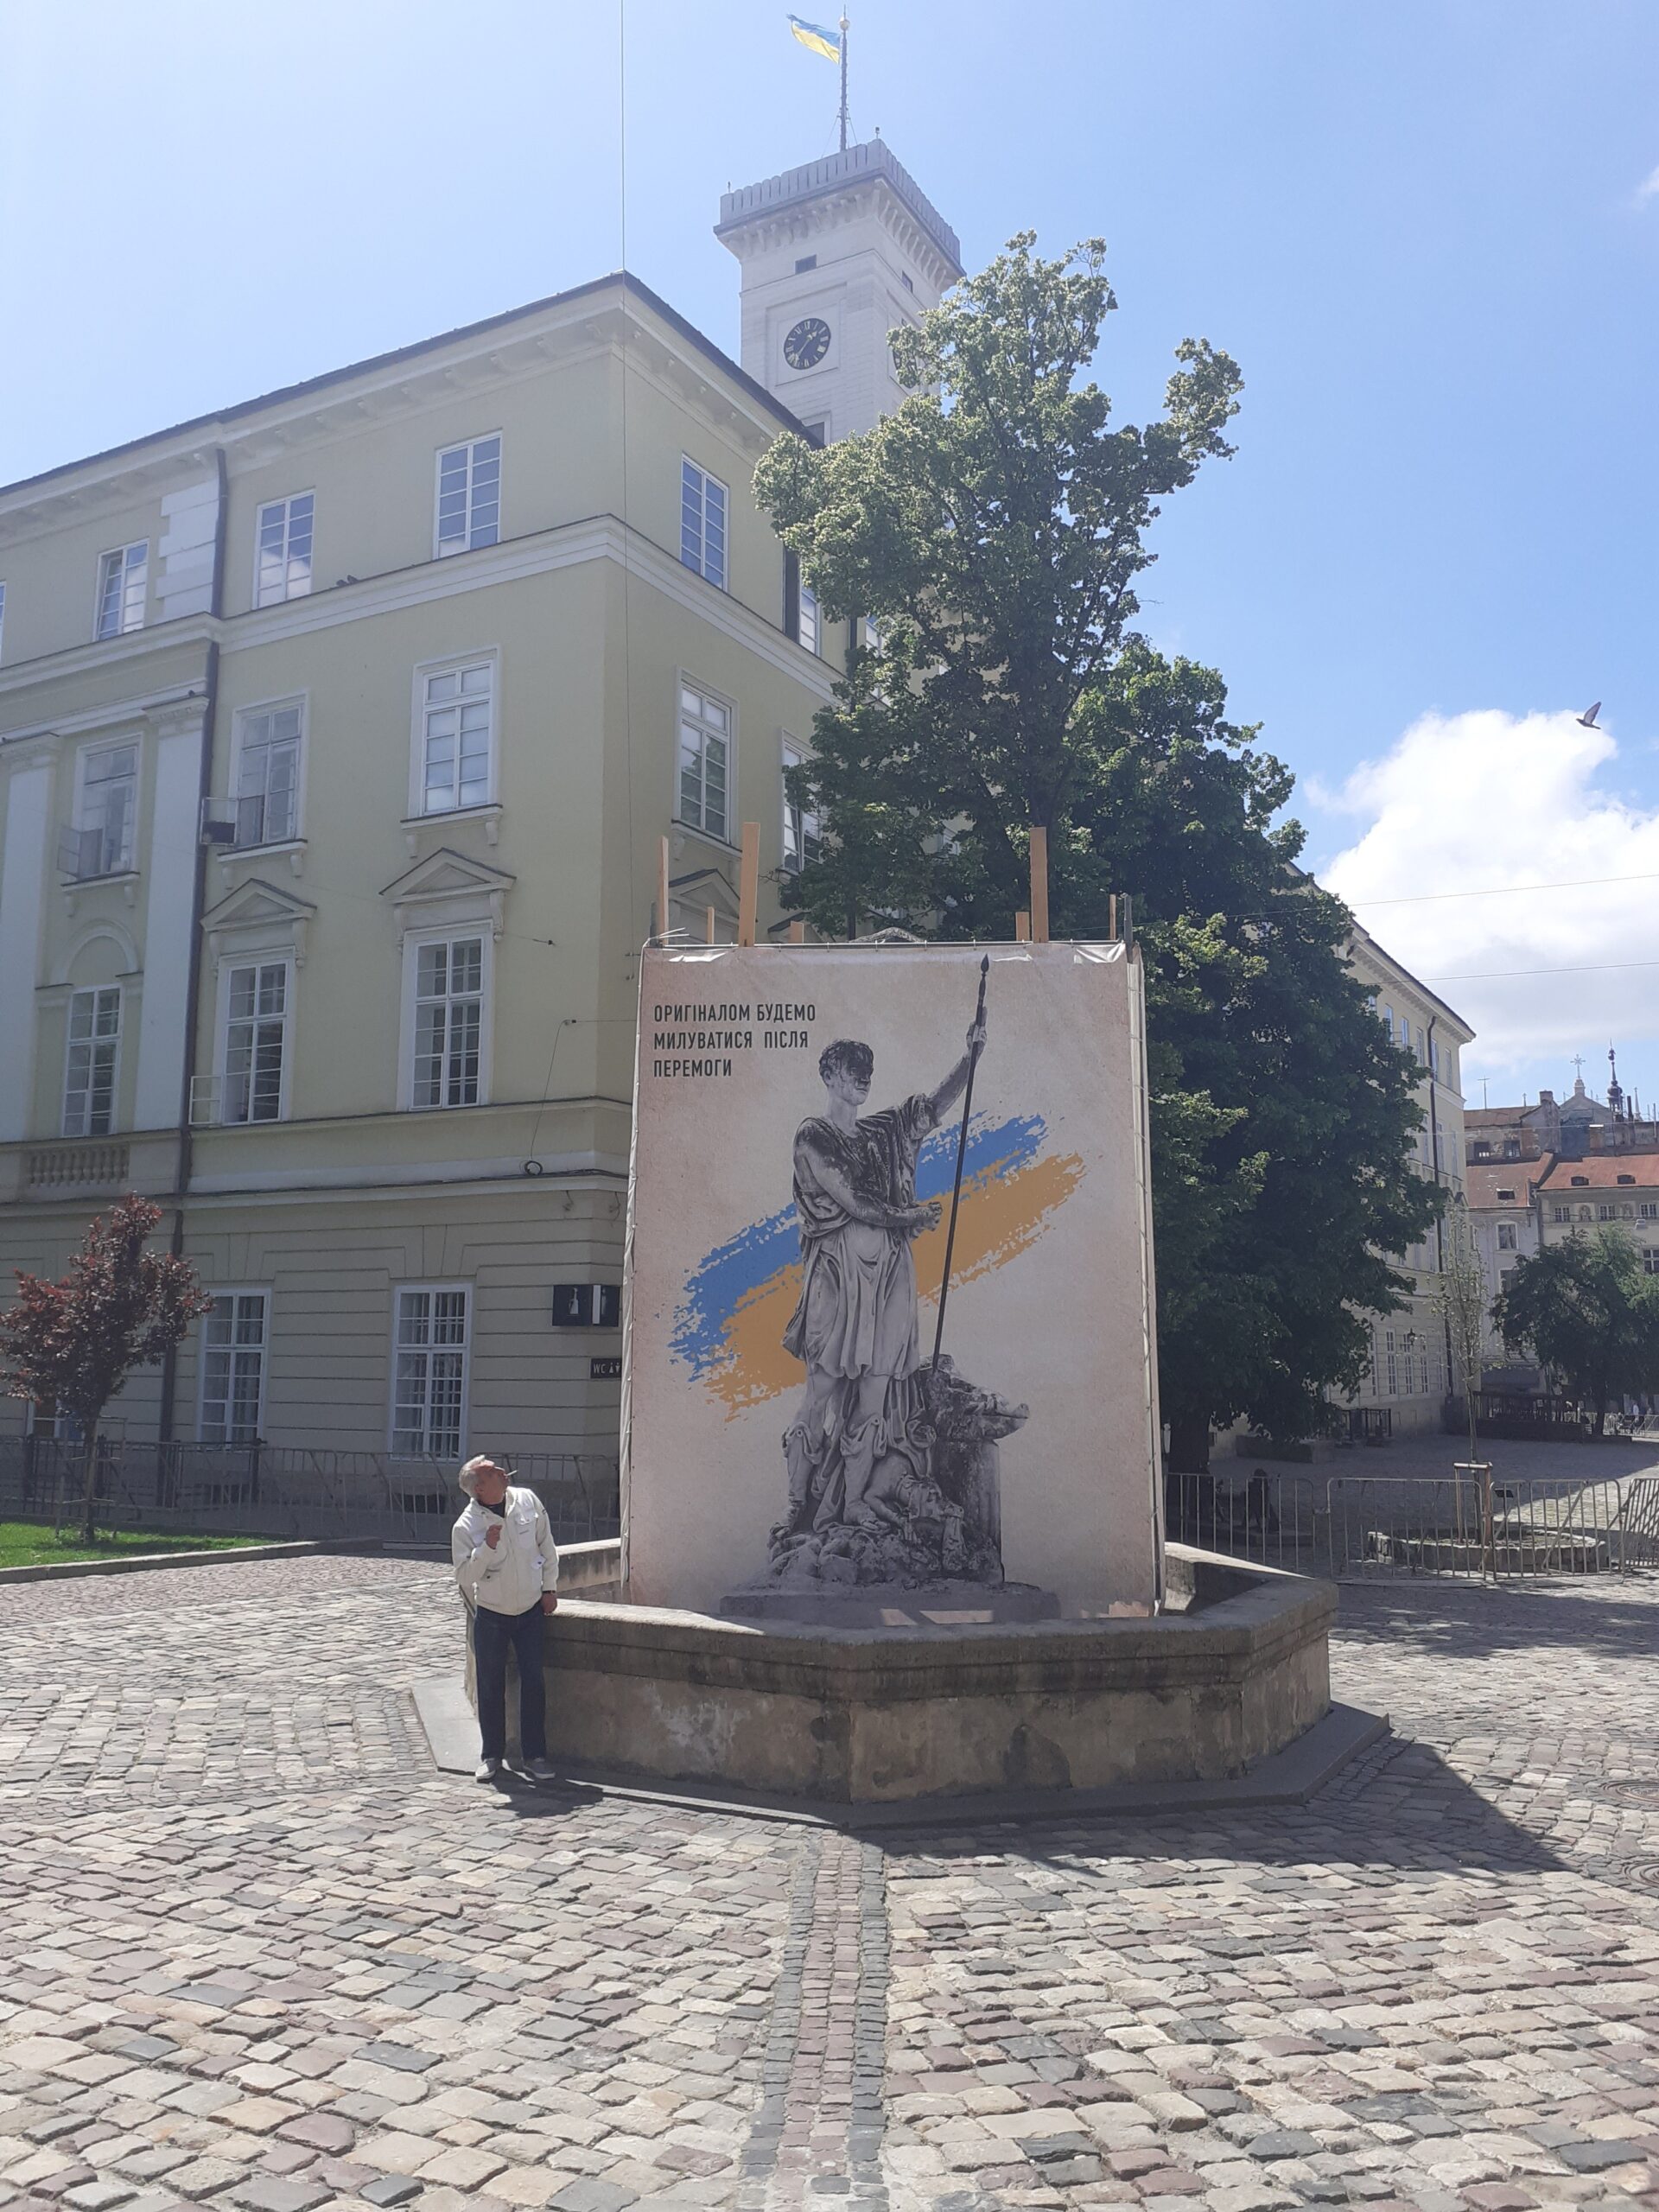 Rynok Square statues are removed and stored safely, the banner shows the statue, saying “The original will be returned after victory”, May 2022, Lviv. Foto Diana Vonnak